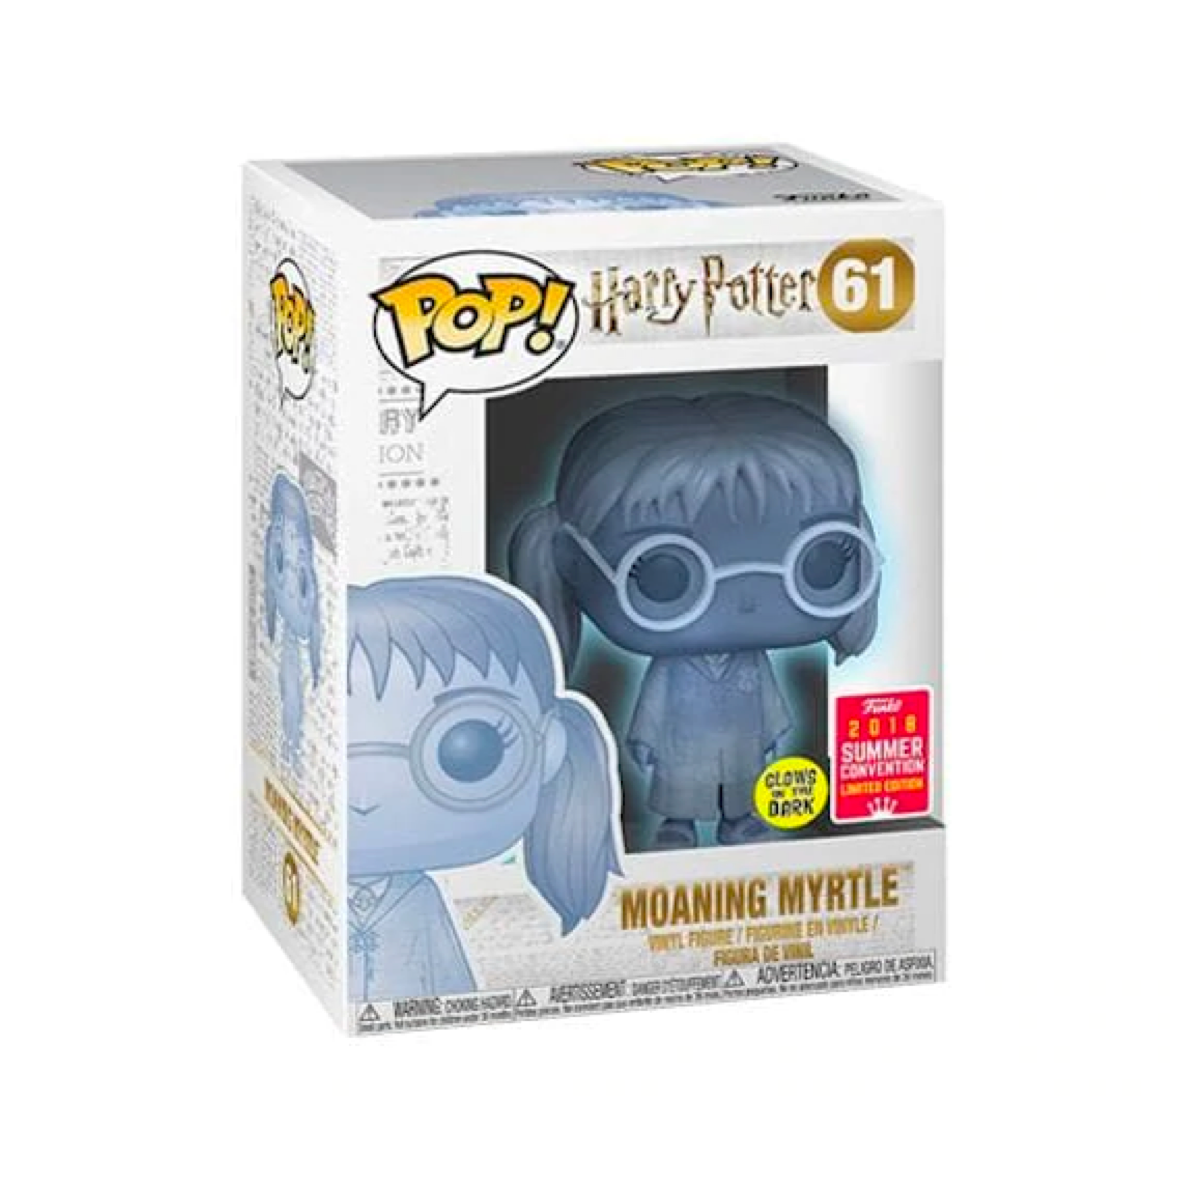 MOANING MYRTLE GLOW SDCC 2018 CONVENTION EXCLUSIVE FUNKO POP! VINYL #61